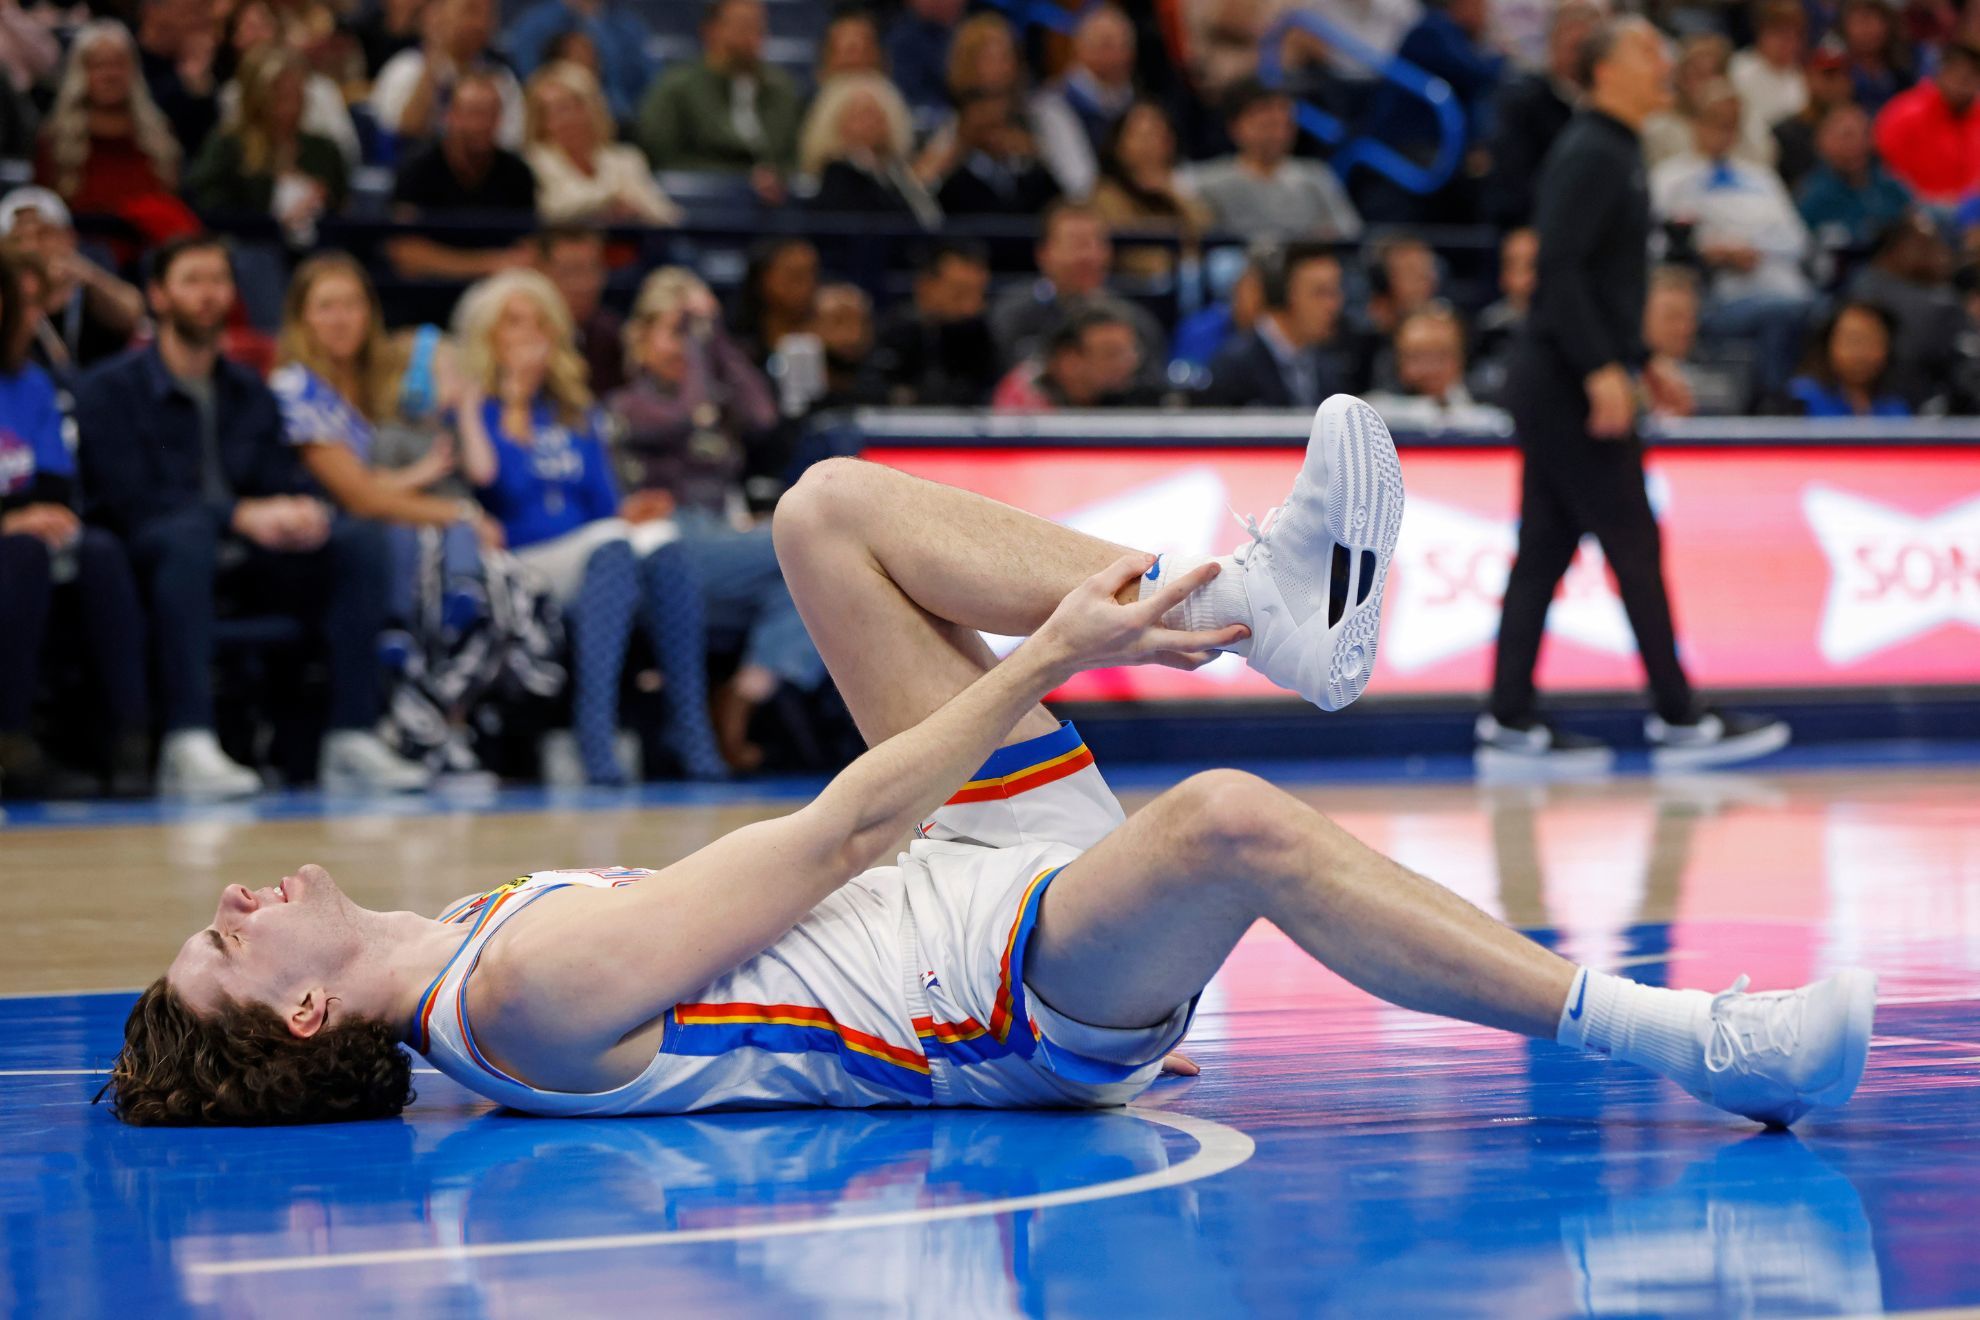 Josh Giddey does not return to Thunders win over Clippers after ankle injury